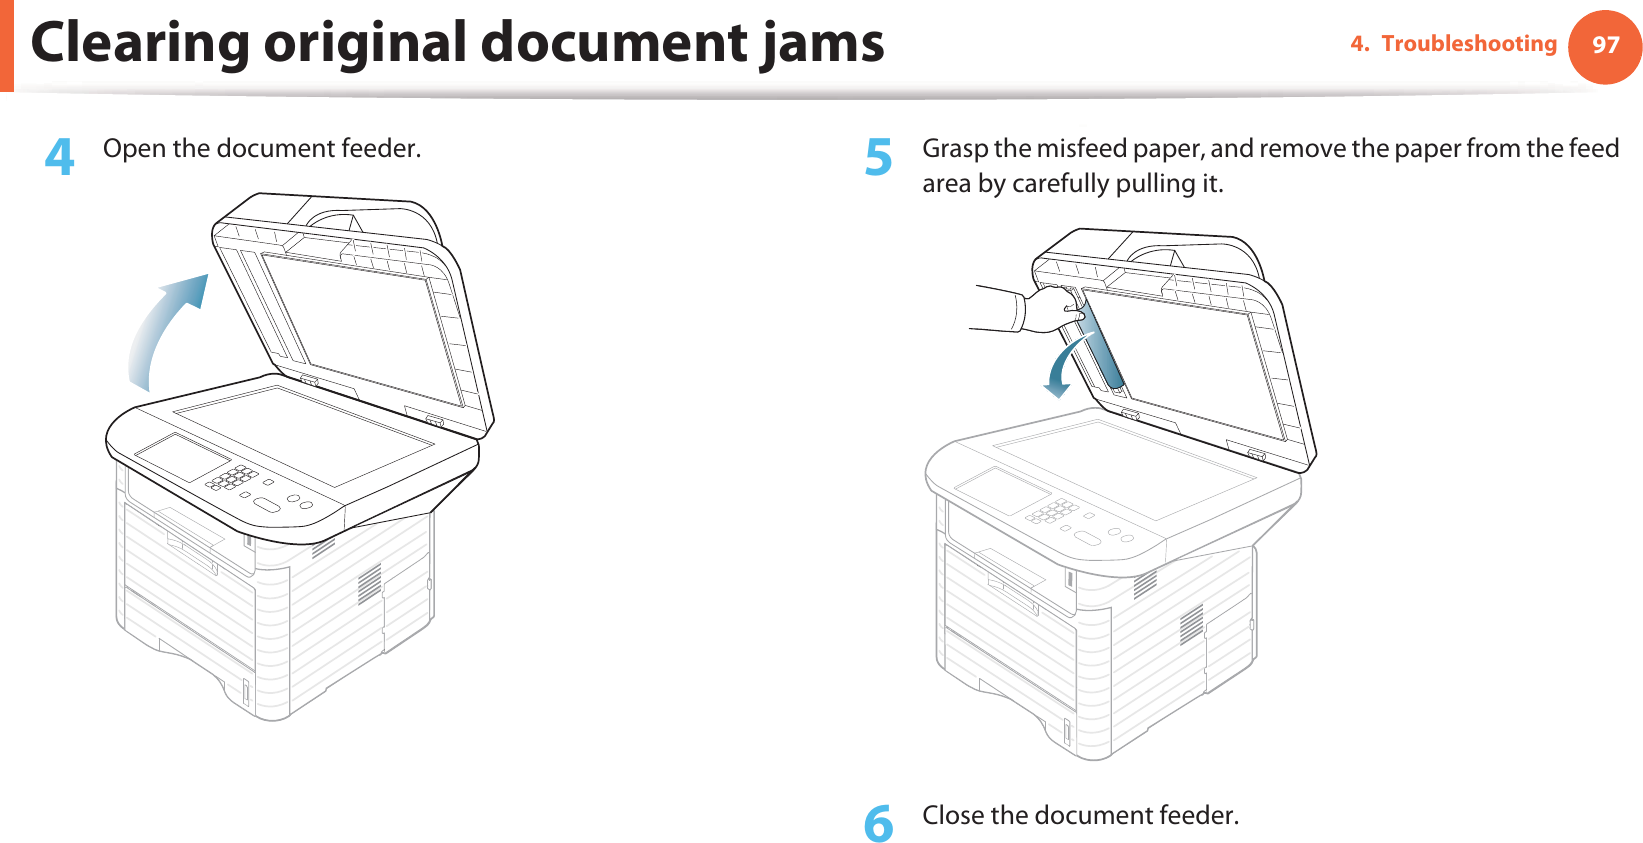 Clearing original document jams 974. Troubleshooting4  Open the document feeder. 5  Grasp the misfeed paper, and remove the paper from the feed area by carefully pulling it.6  Close the document feeder.